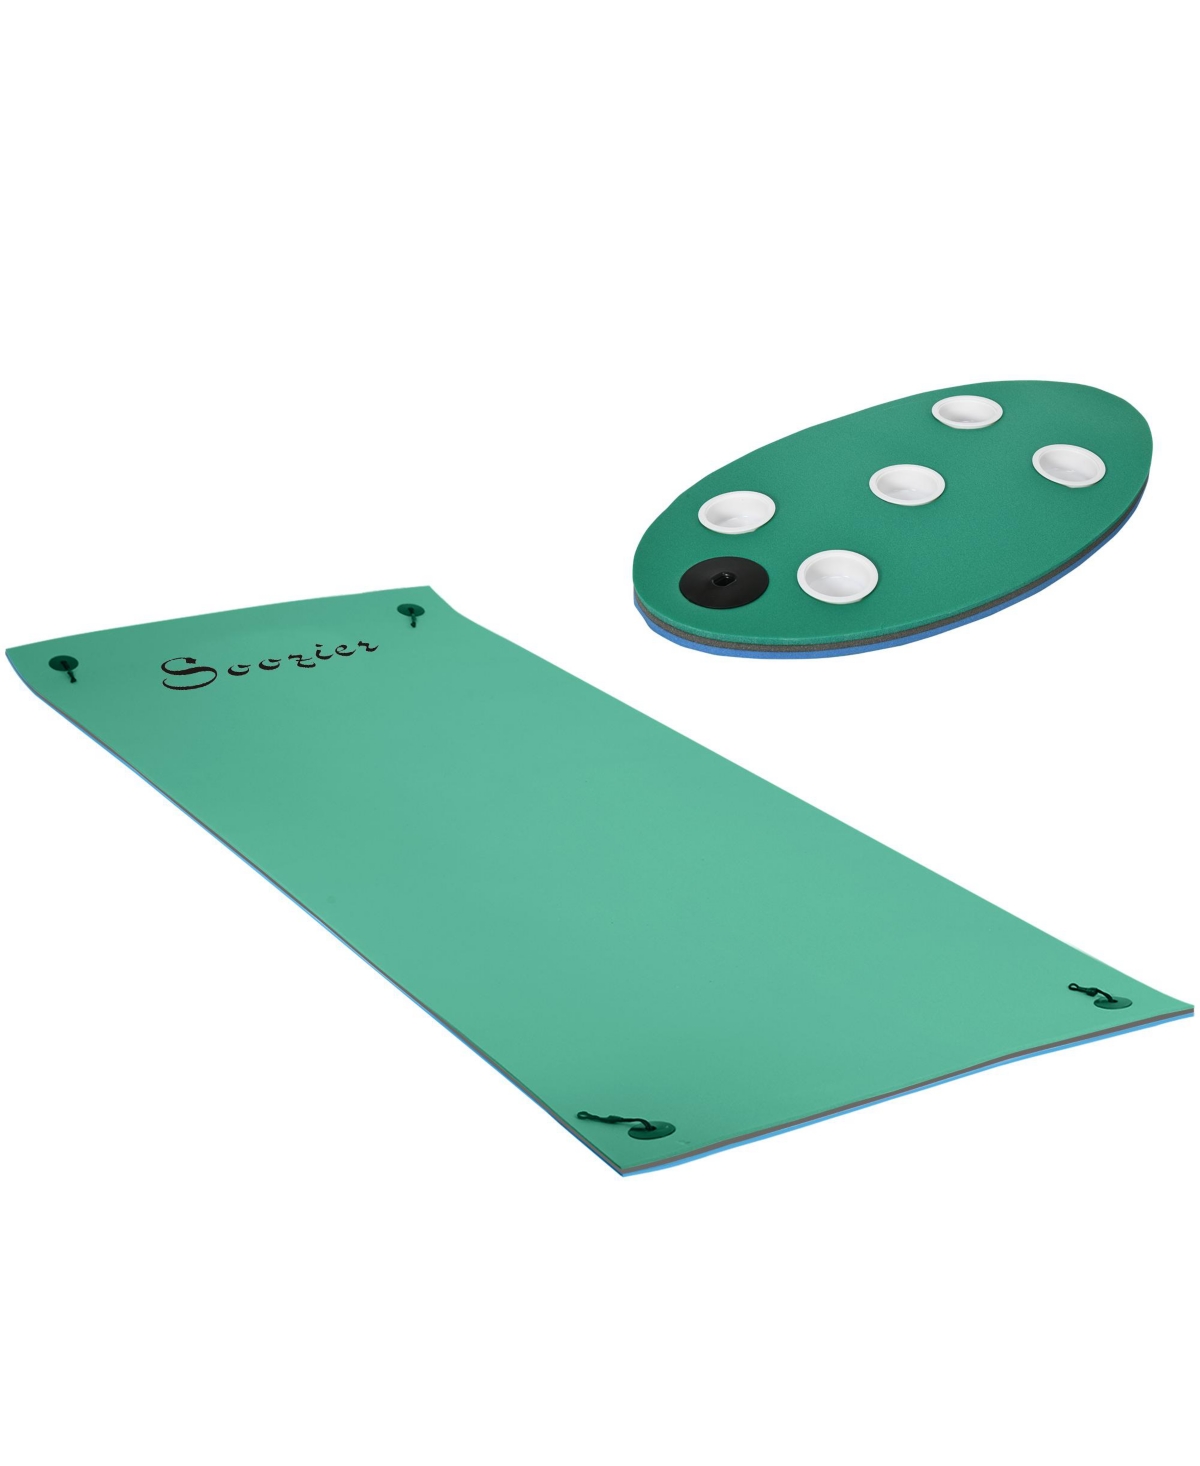 12.5' x 5' Floating Mat with Drink Holders 3-Layer Lily Pad, Green - Green